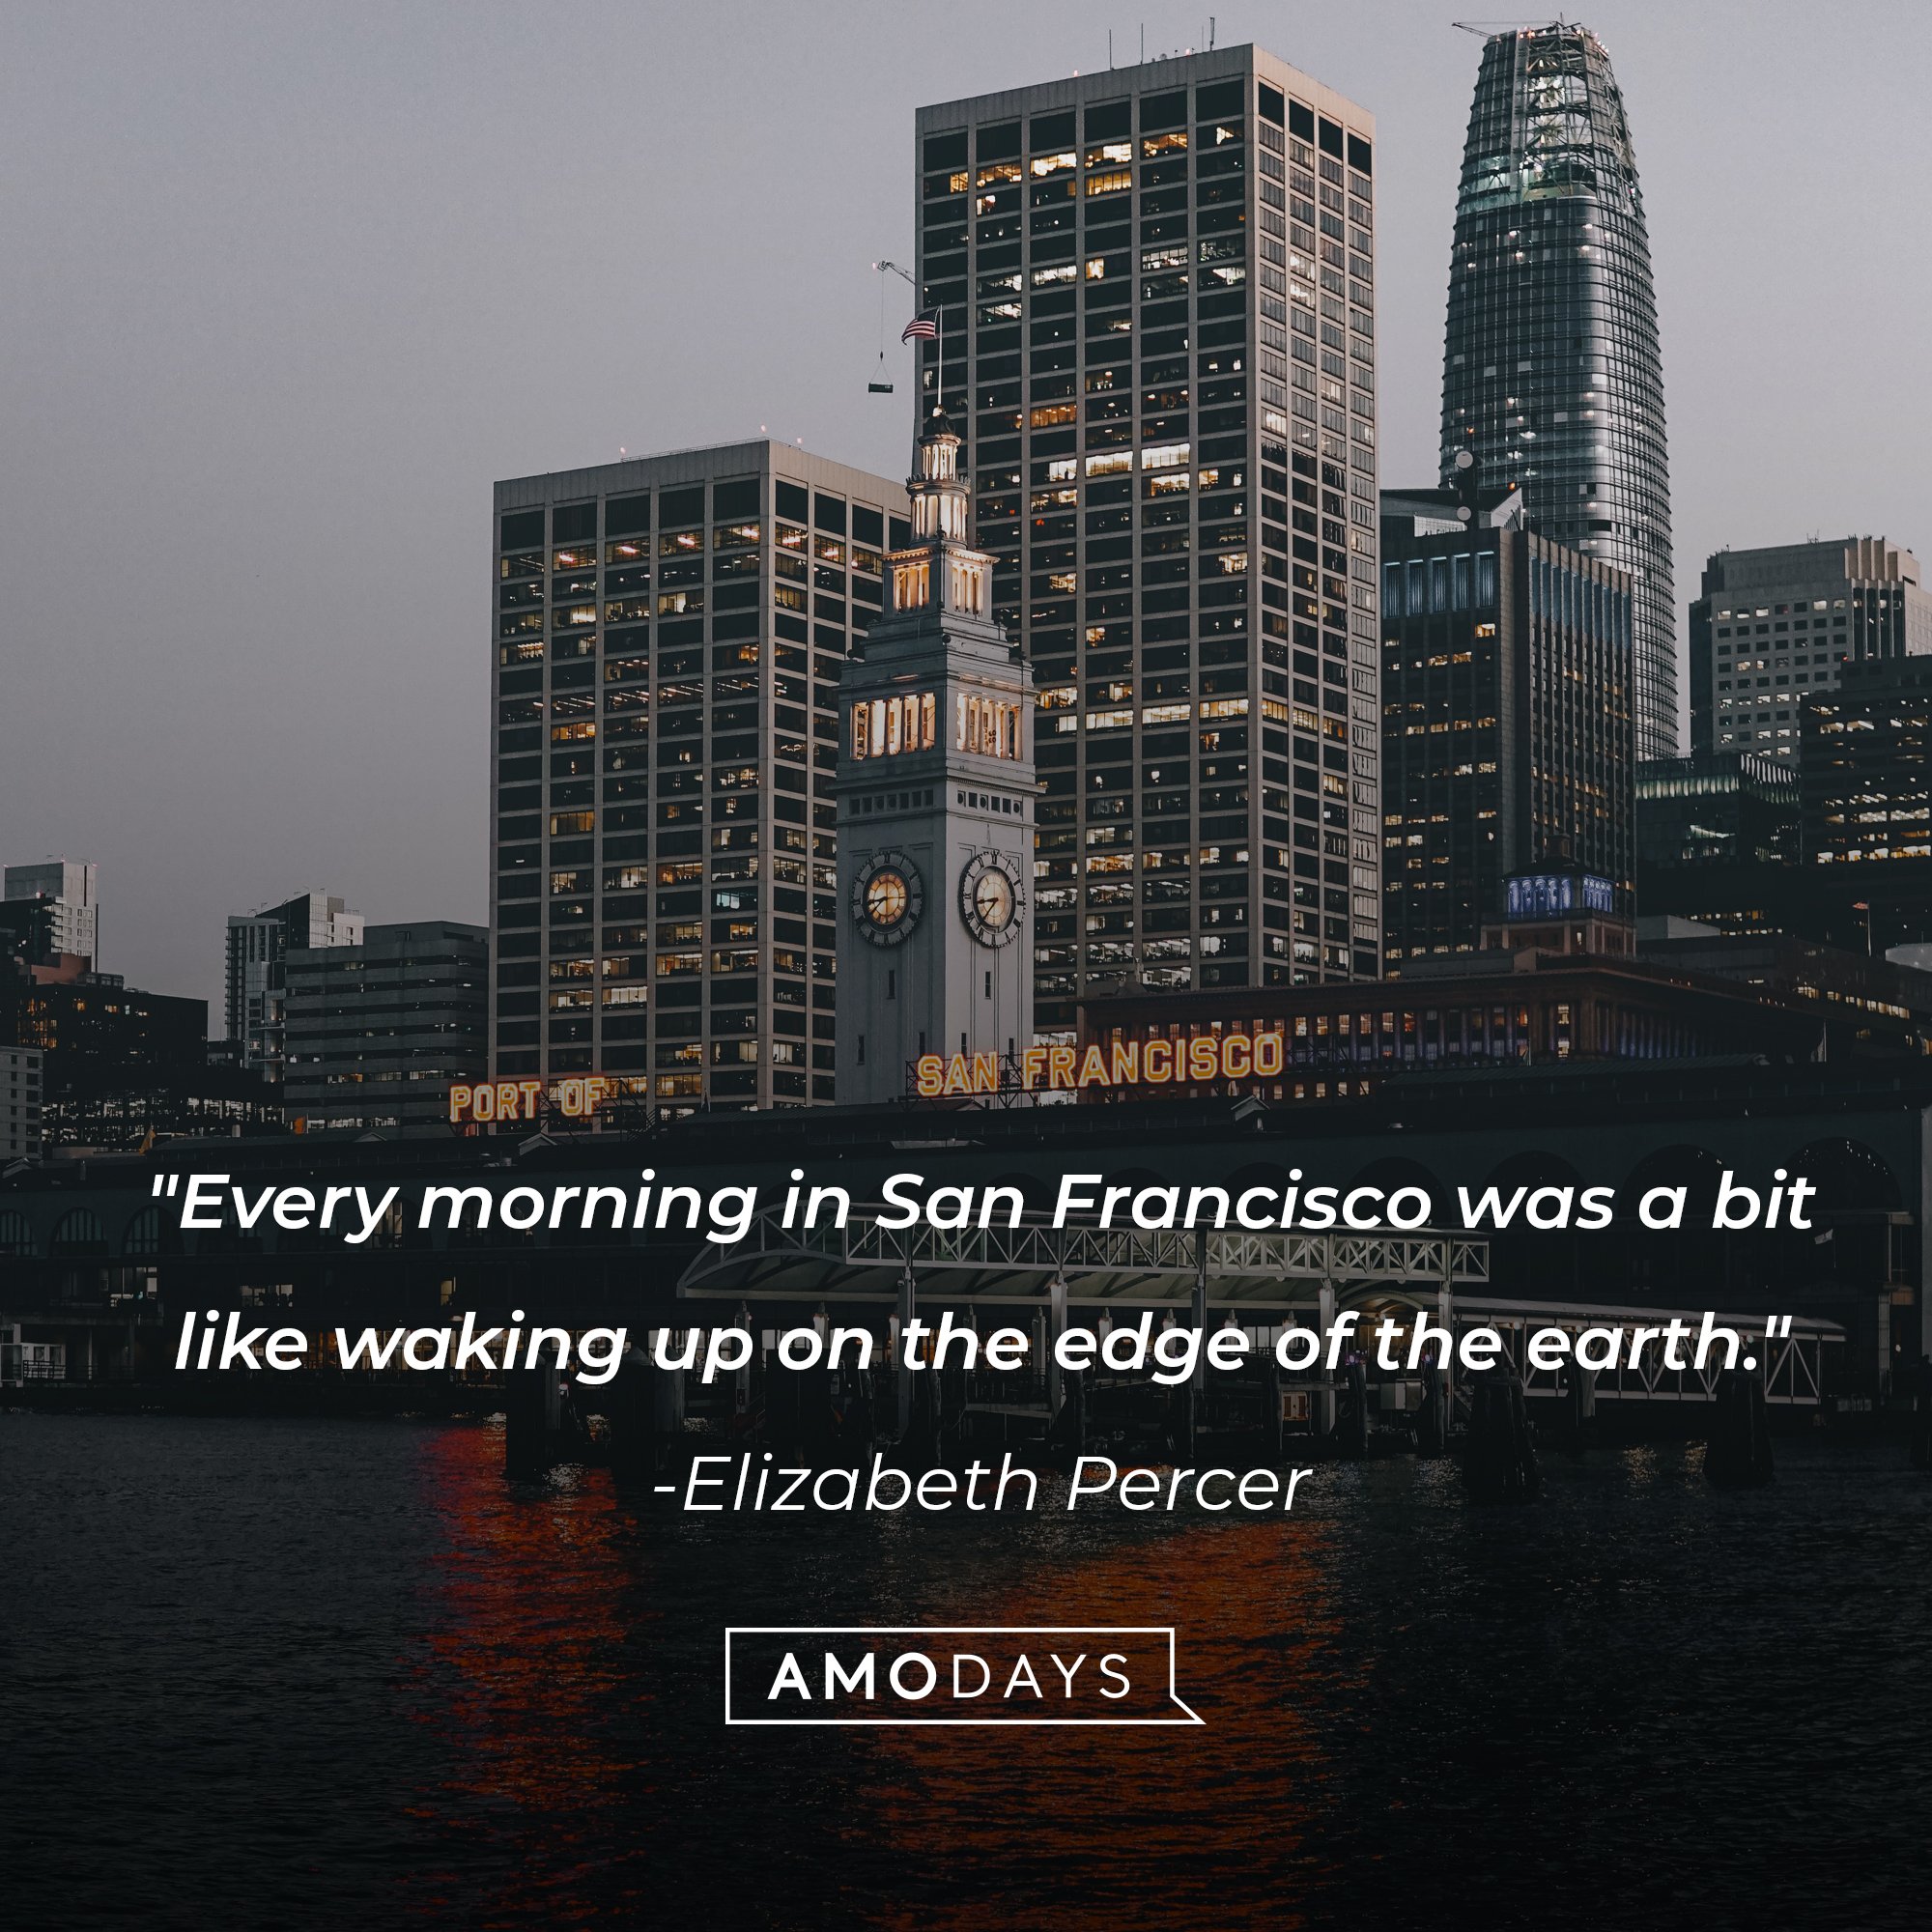 Elizabeth Percer’s quote: “Every morning in San Francisco was a bit like waking up on the edge of the earth." | Image: AmoDays